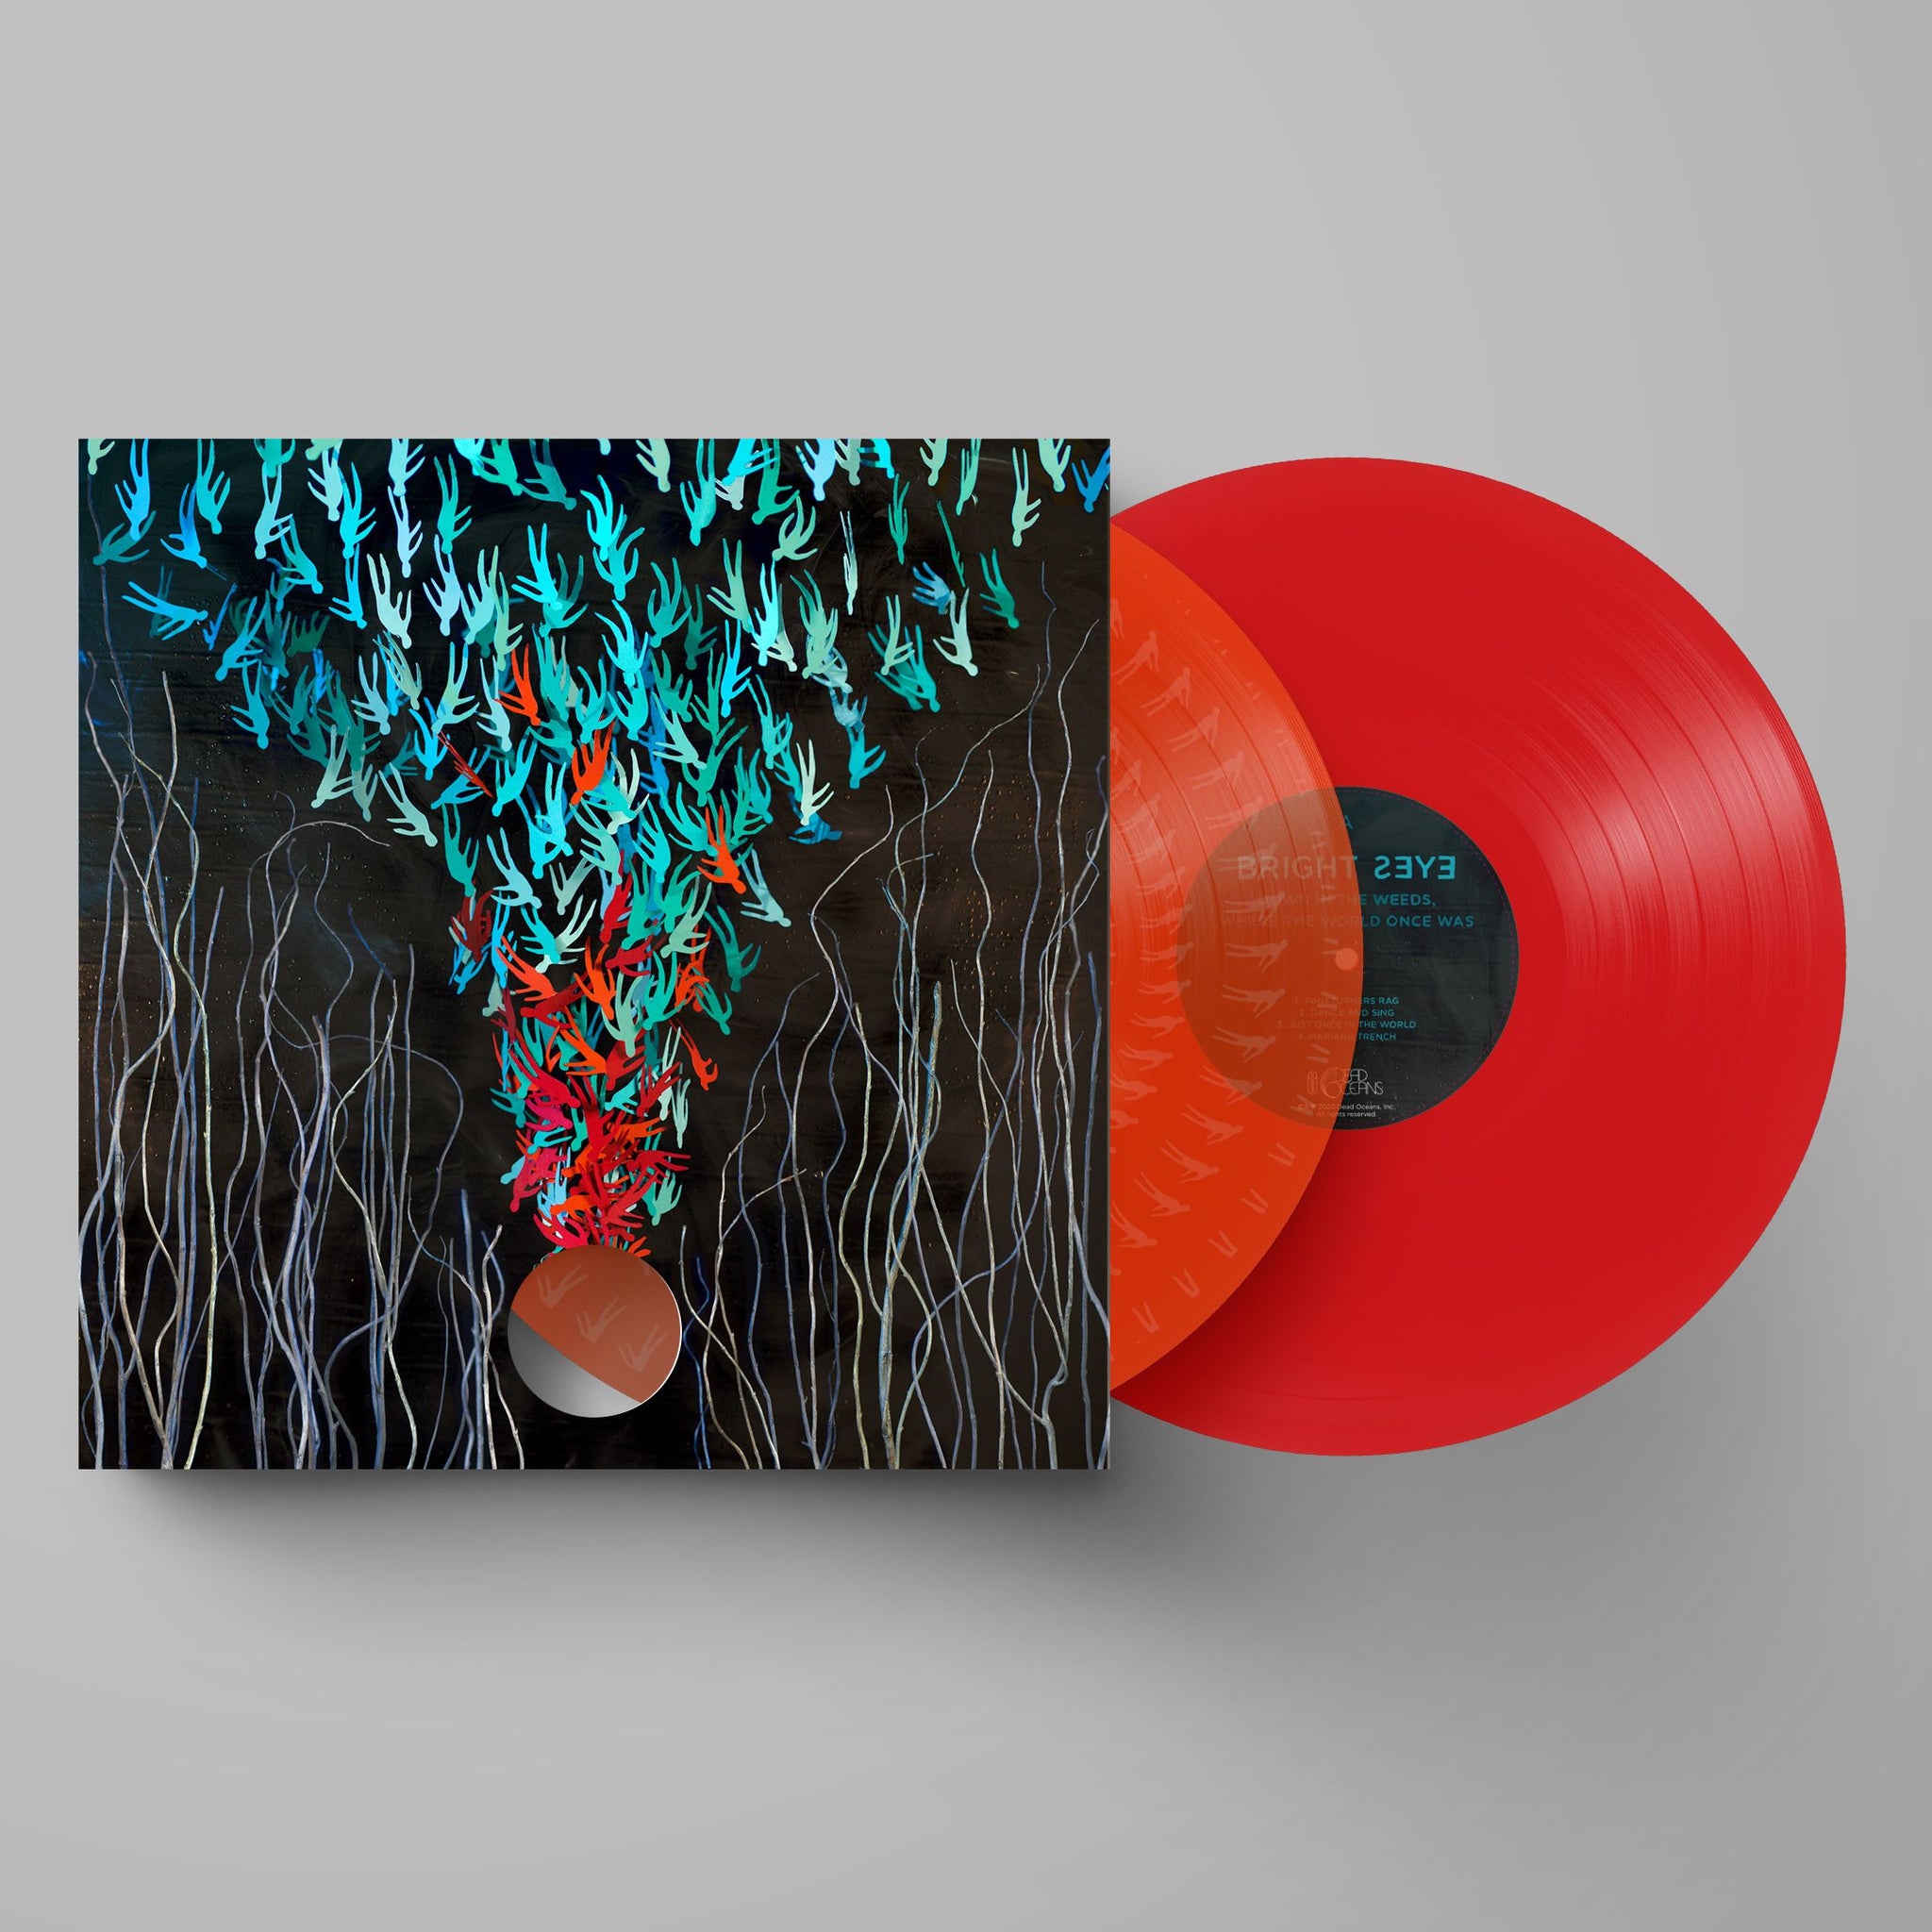 BRIGHT EYES – Down in the Weeds, Where the World Once Was - 2LP - Limited Red & Orange Vinyl